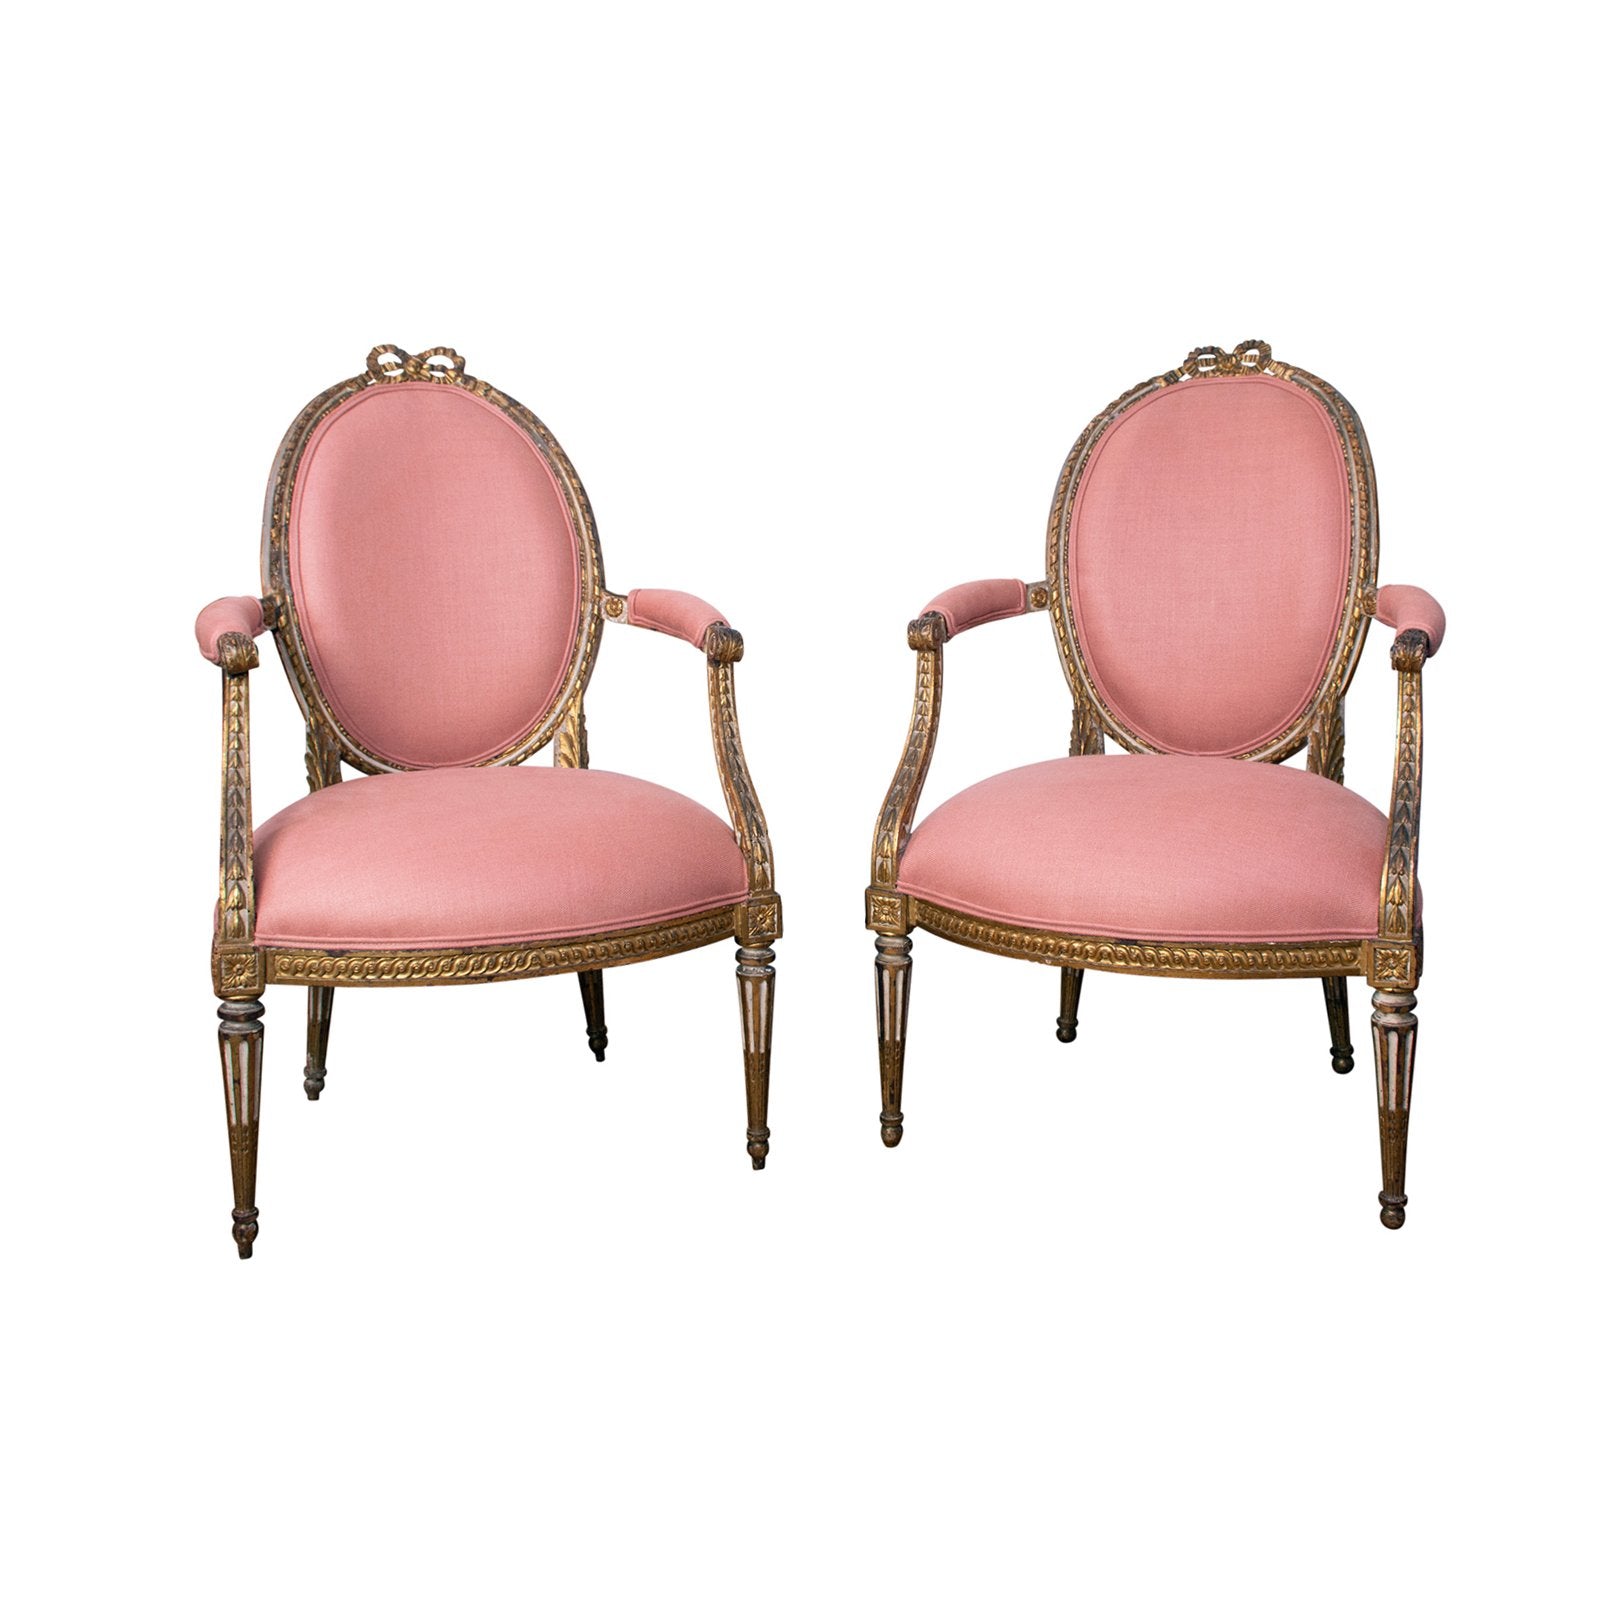 A Pair of 18th Century Louis XVI Giltwood Fauteuils